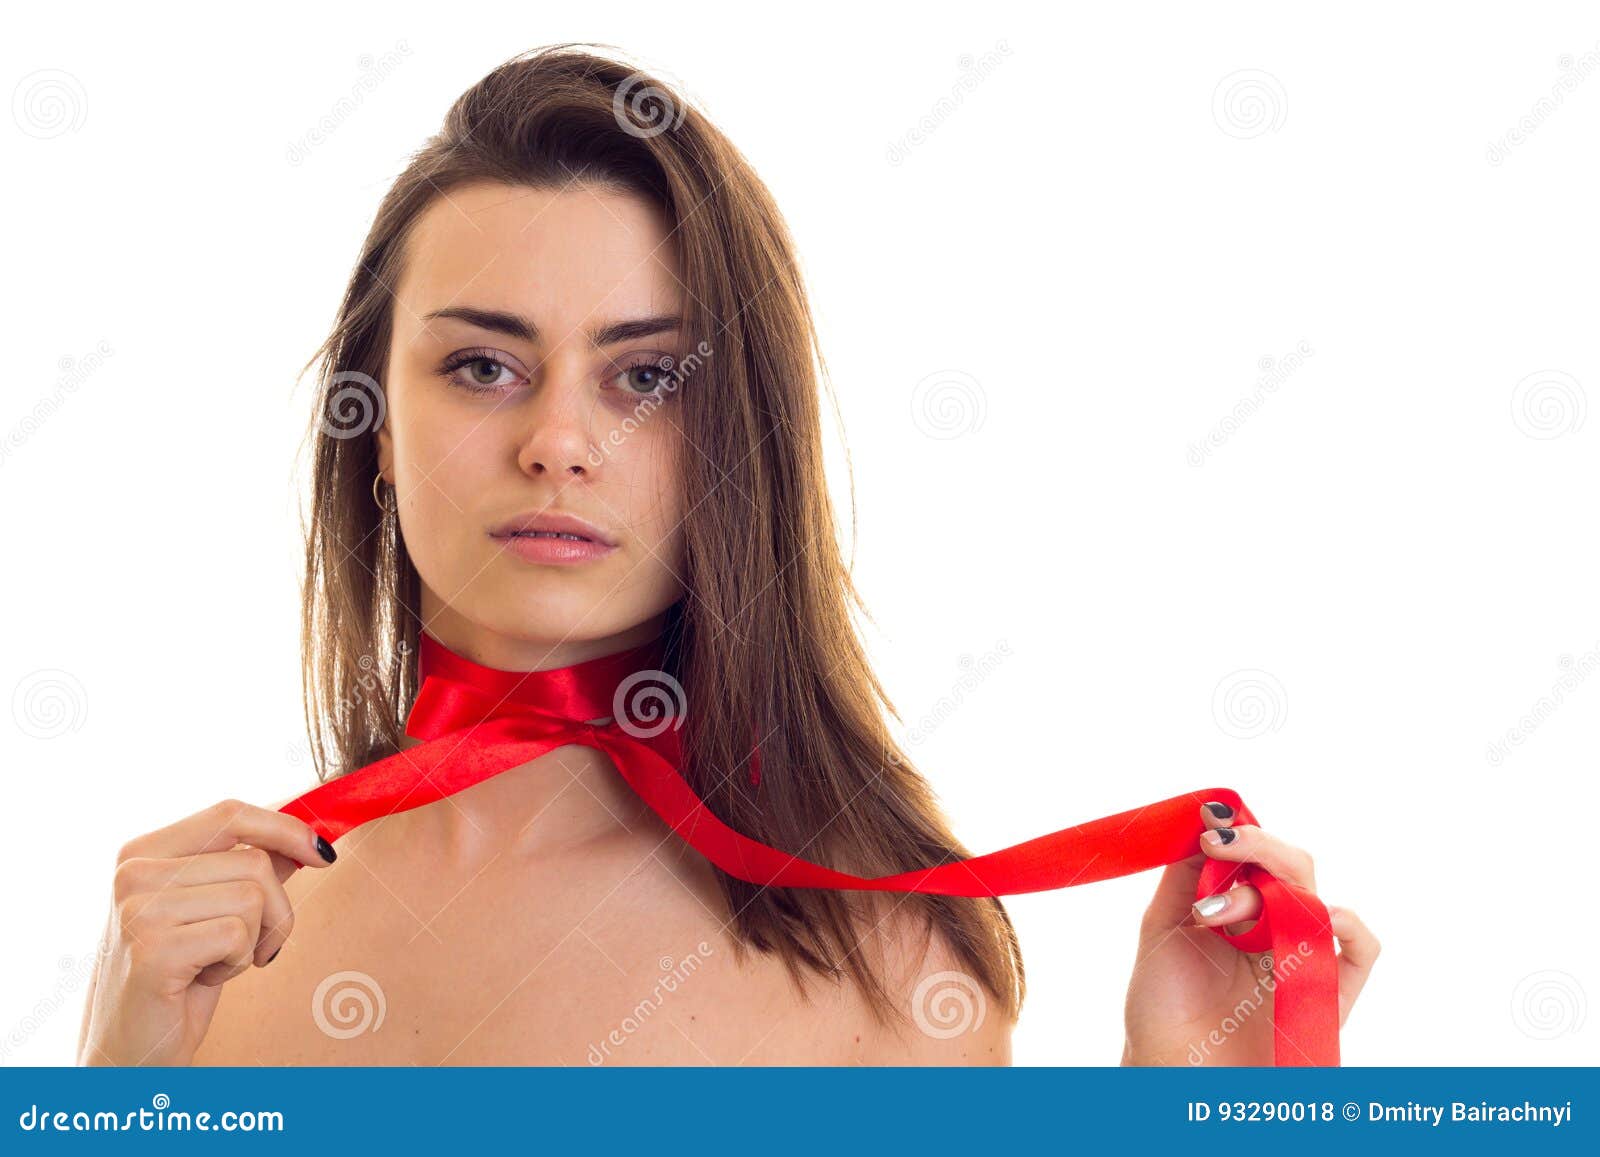 Black woman red bow naked Nude Woman Red Bow Photos Free Royalty Free Stock Photos From Dreamstime